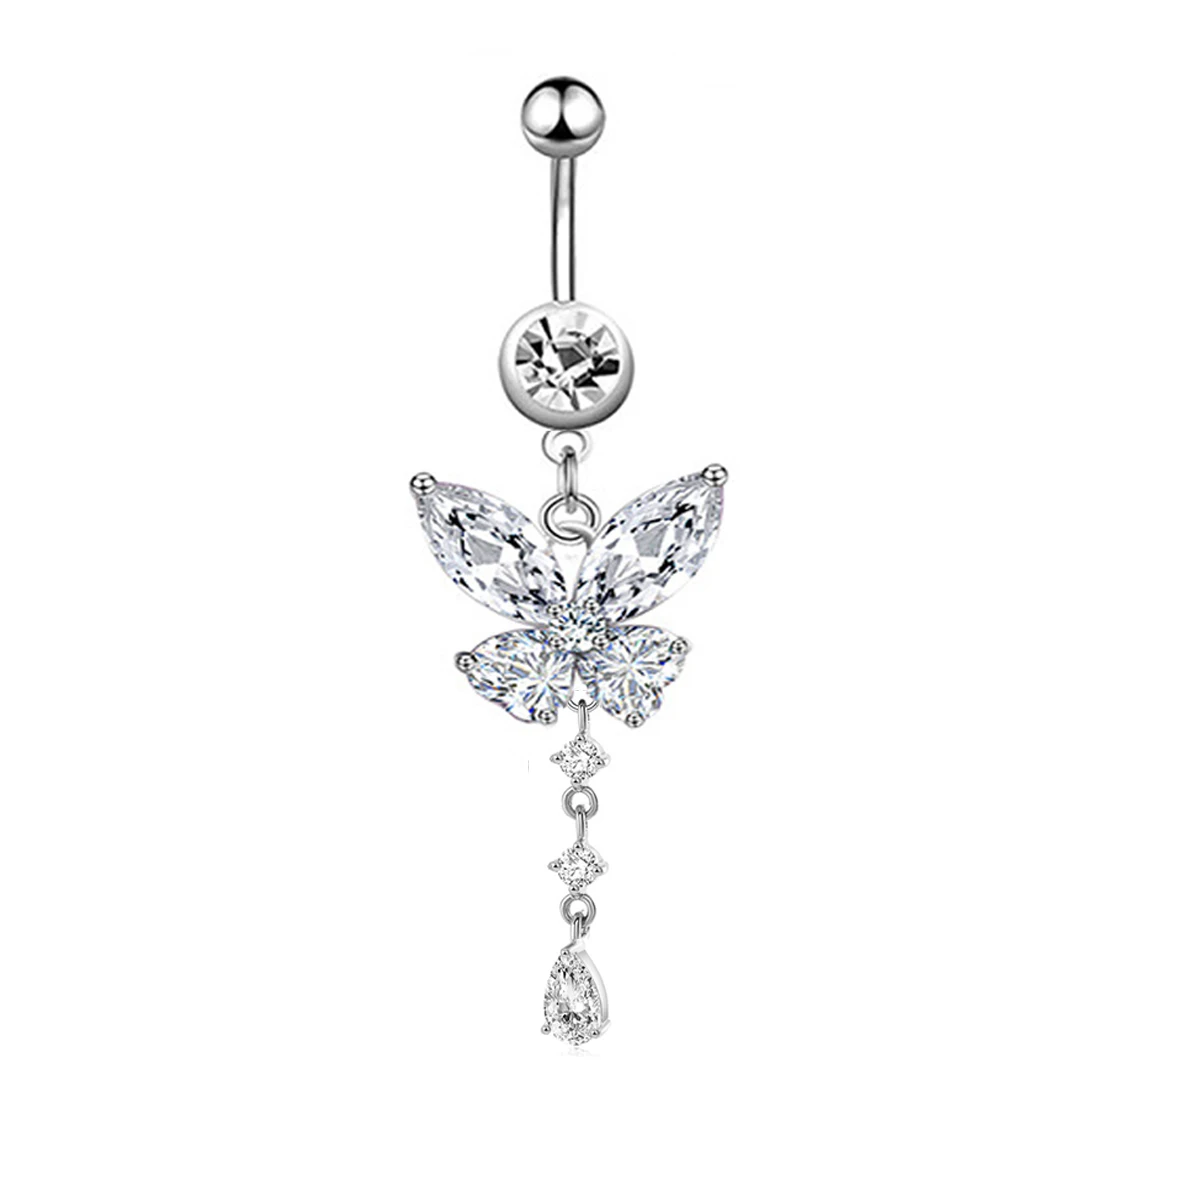 

Gaby hot sell silver butterfly belly rings crystal stainless steel belly rings body piercing jewelry, Silver color